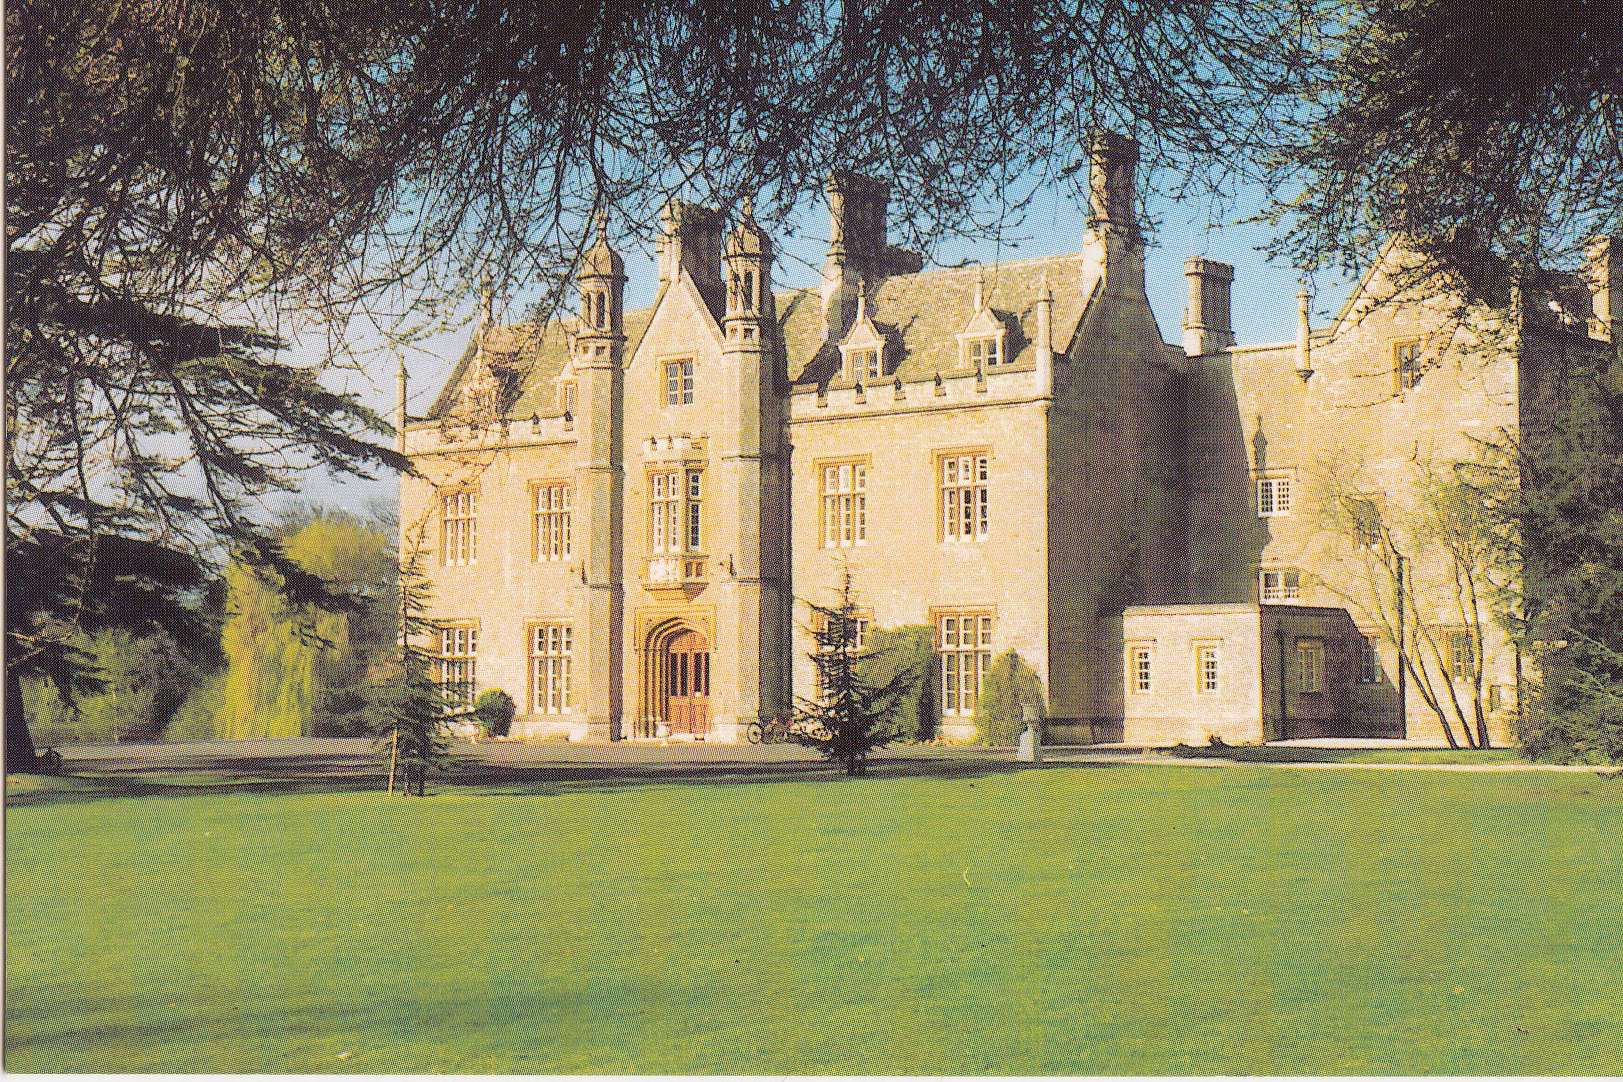 Front cover of the postcard showing Beckett House